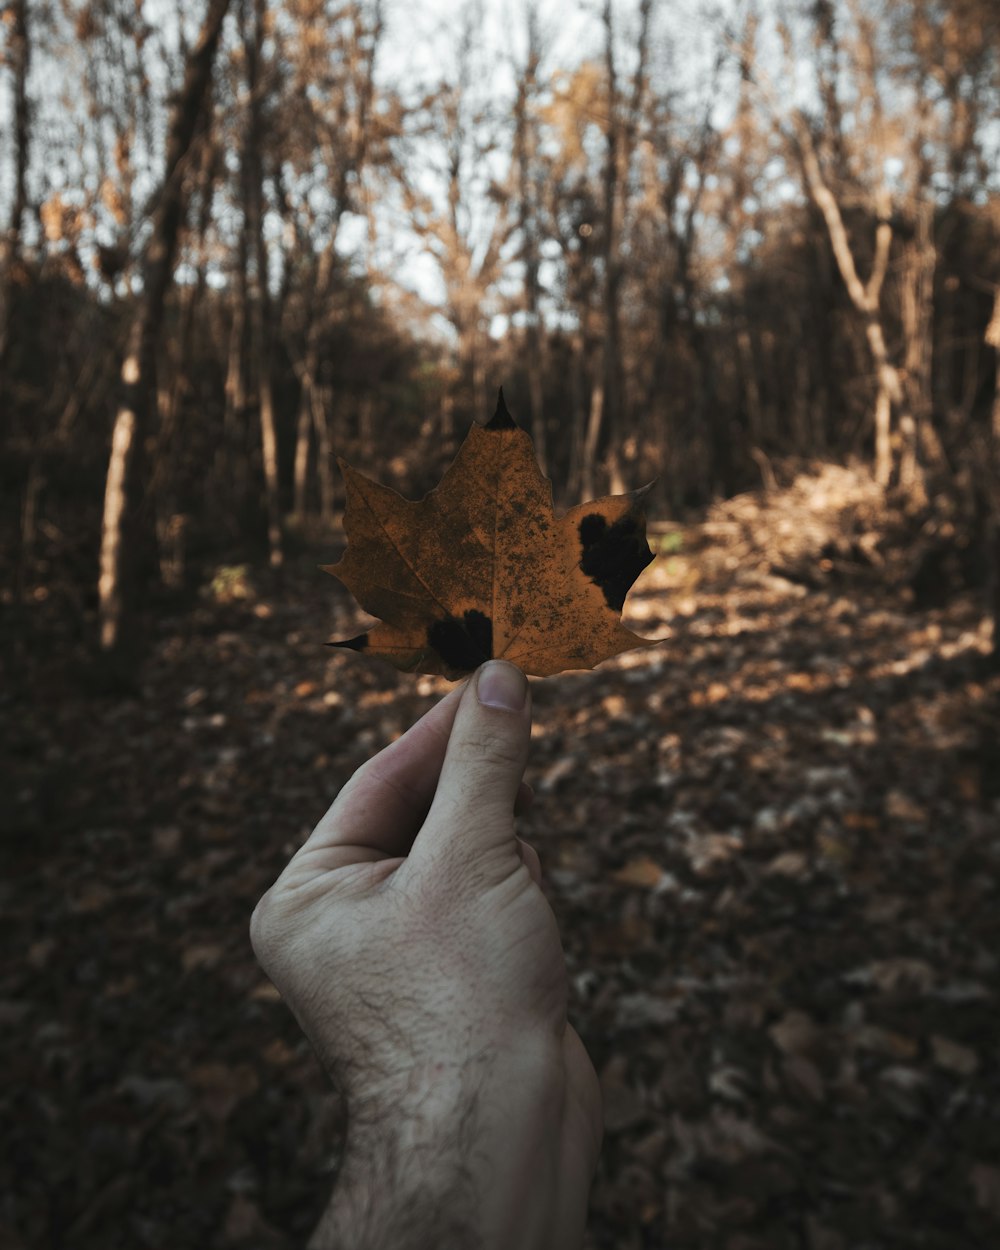 person holding brown dried leaf